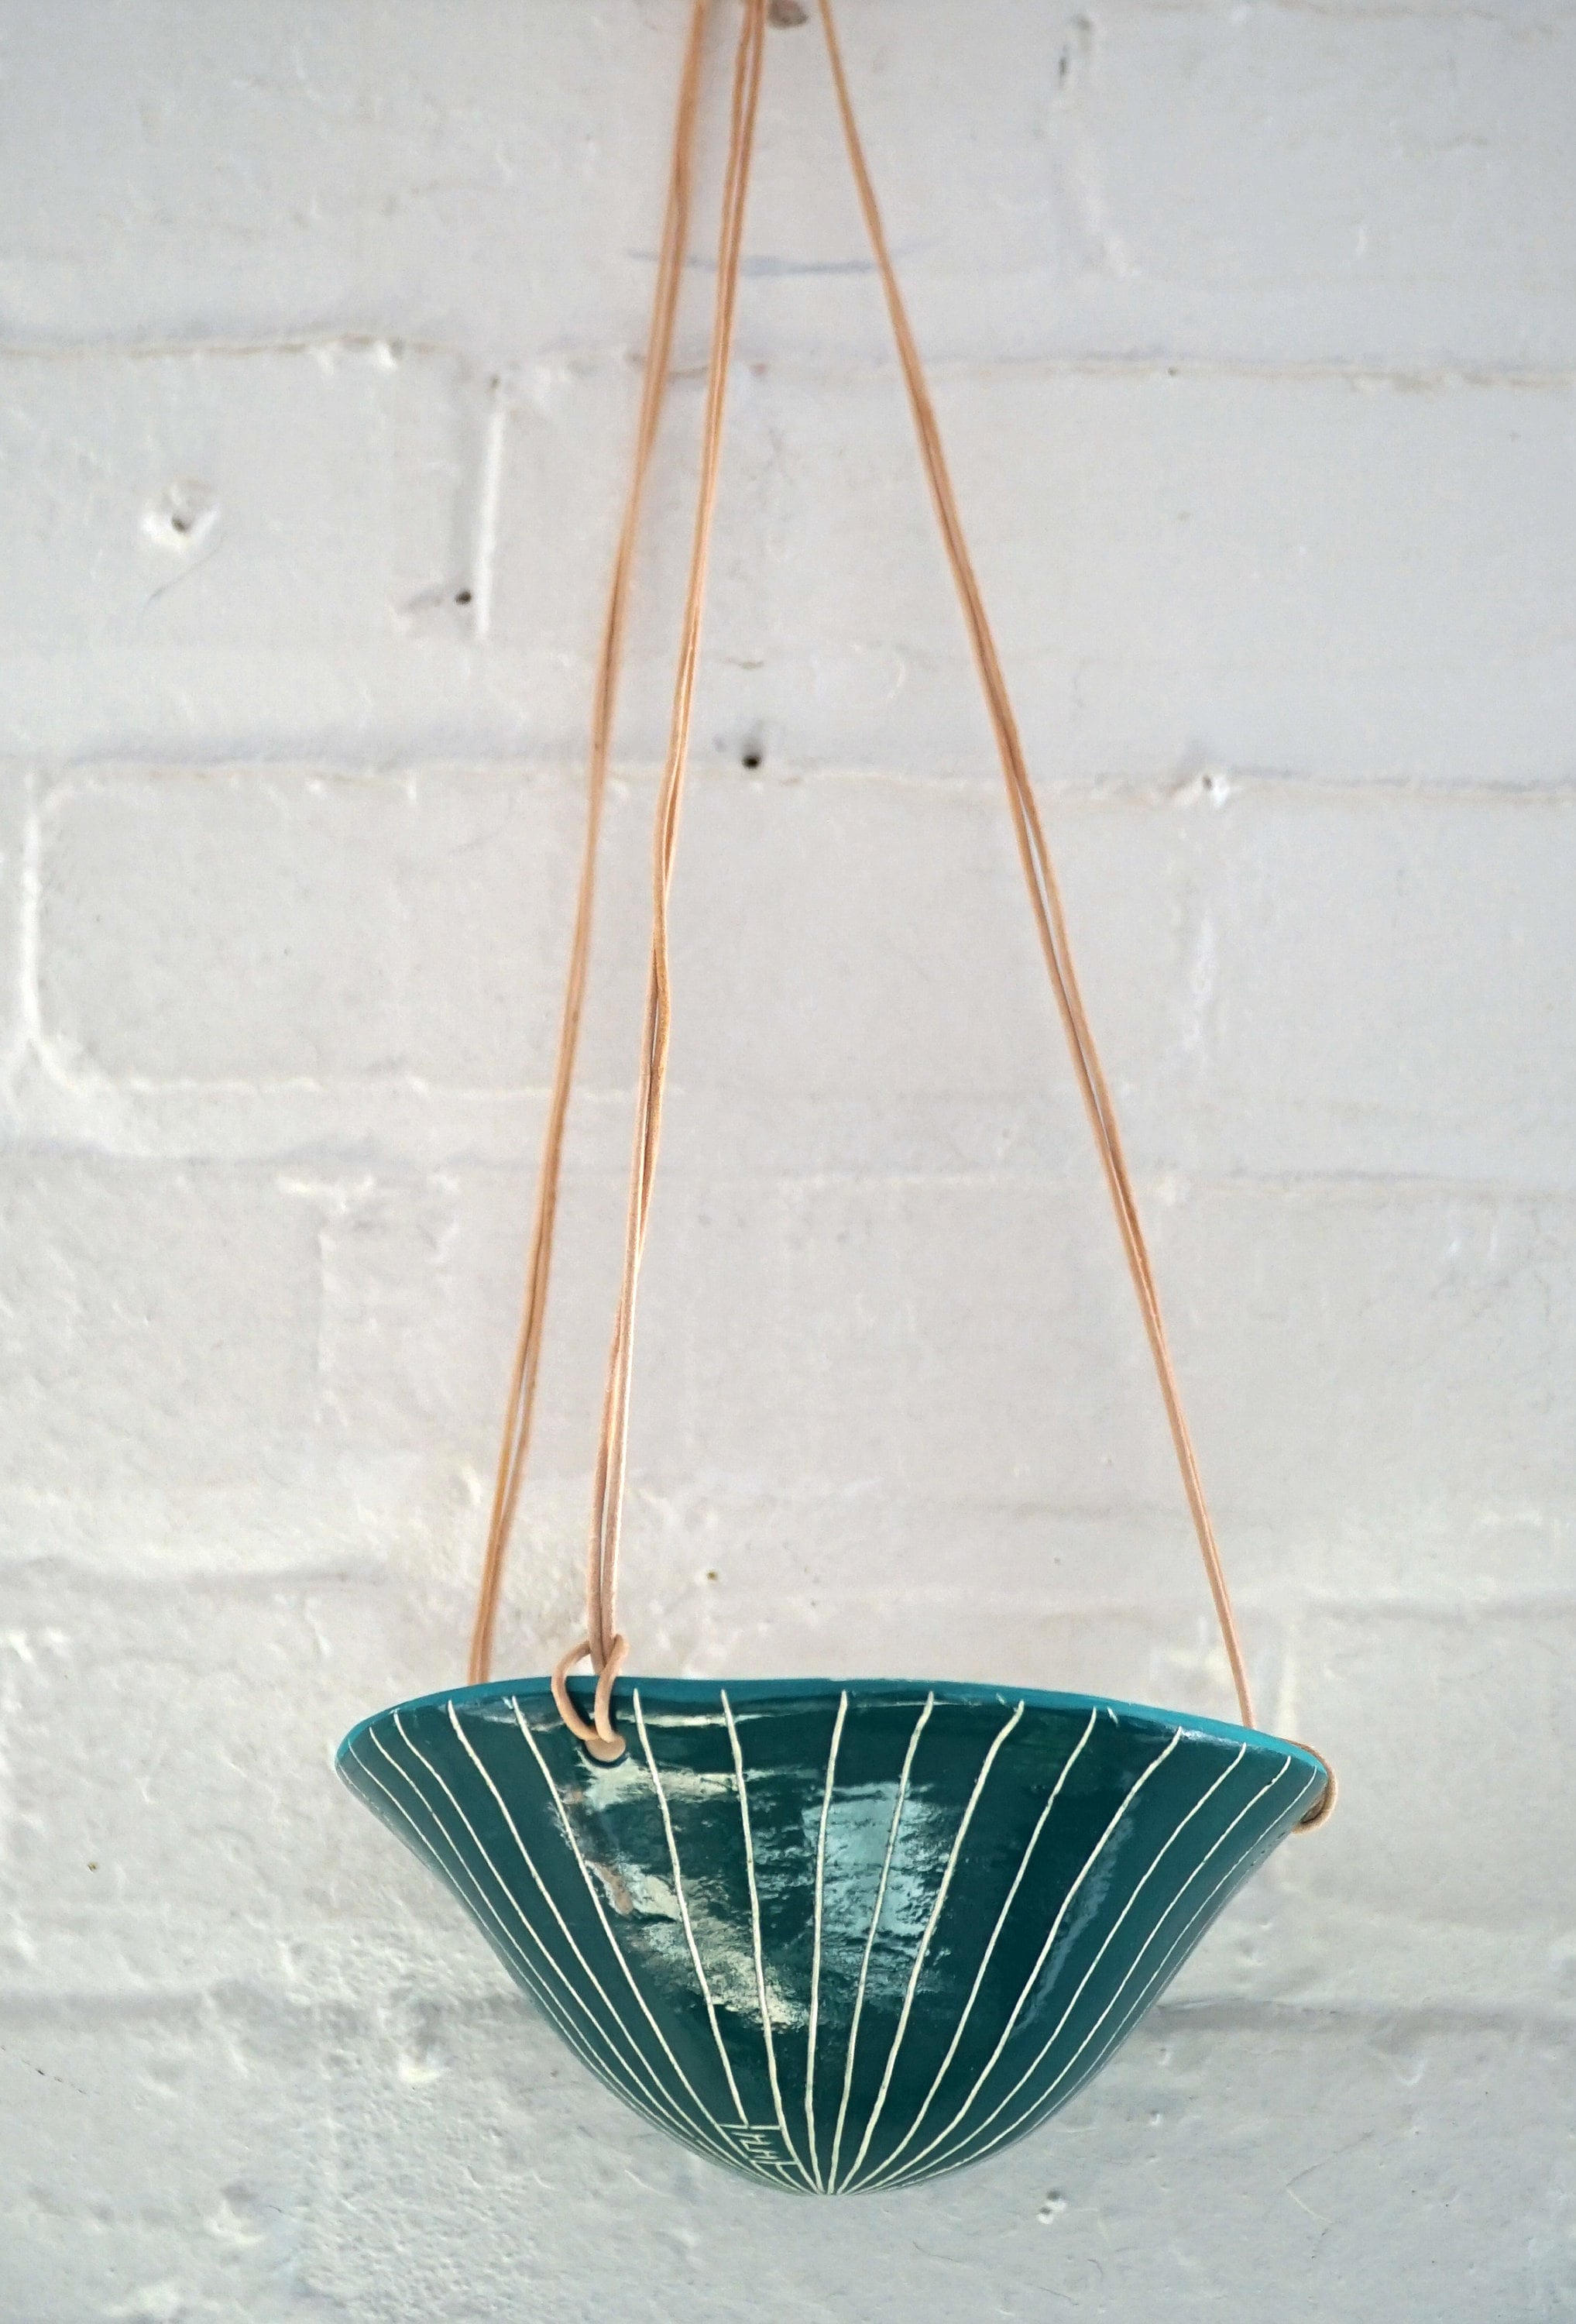 Teal & White Mini Hanging Planter w/ "Vertical Line" Design - Small Hanging Pot with Carved Design - Propagating, Starter Pot, Air Plant Pot